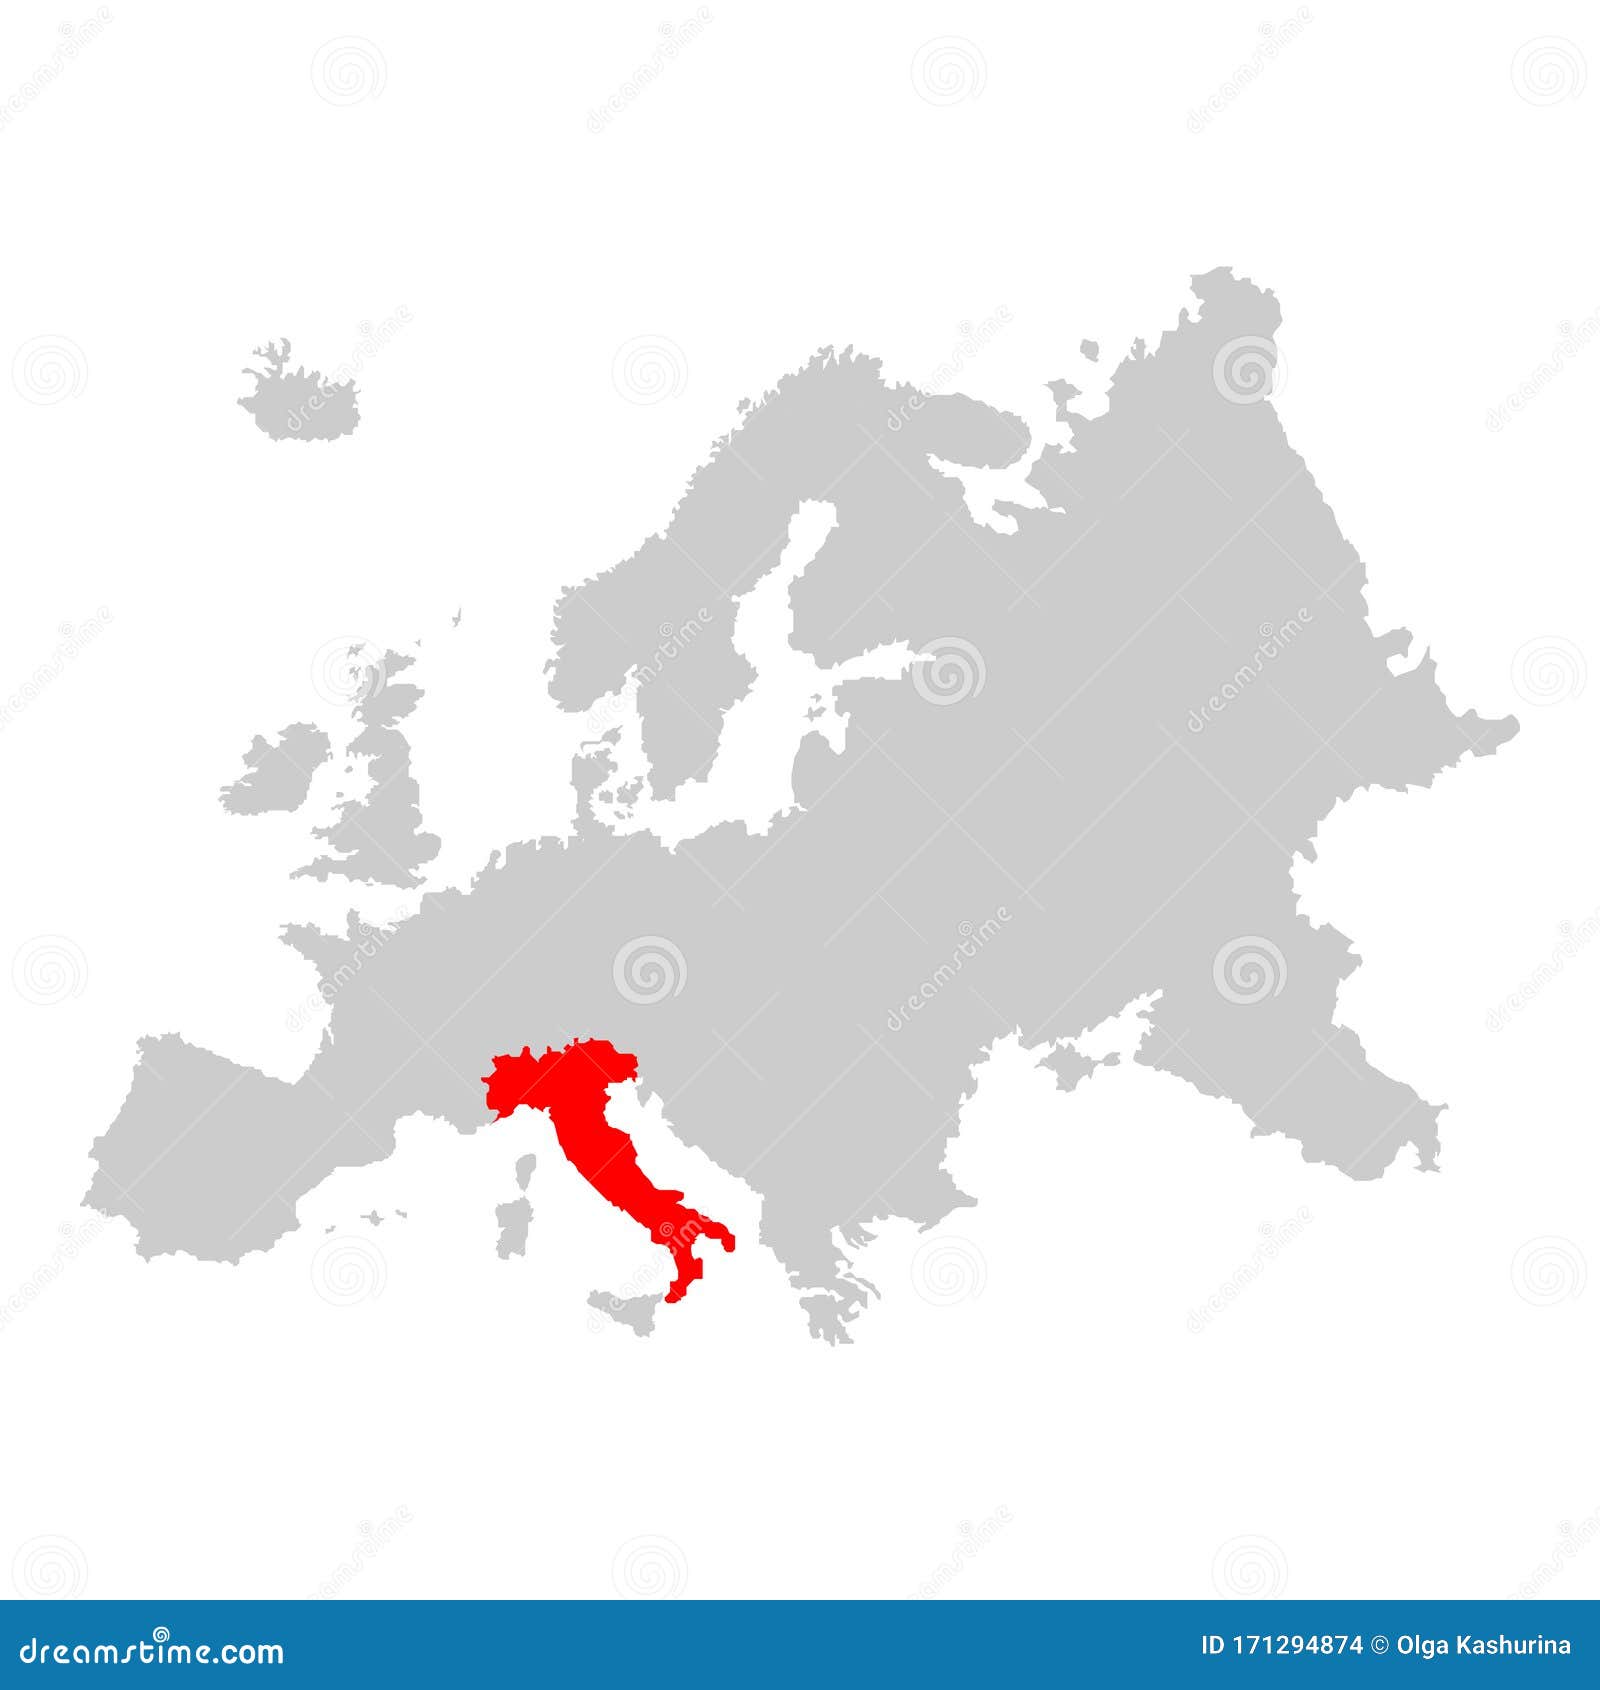 Italy on map of europe stock vector. Illustration of background - 171294874